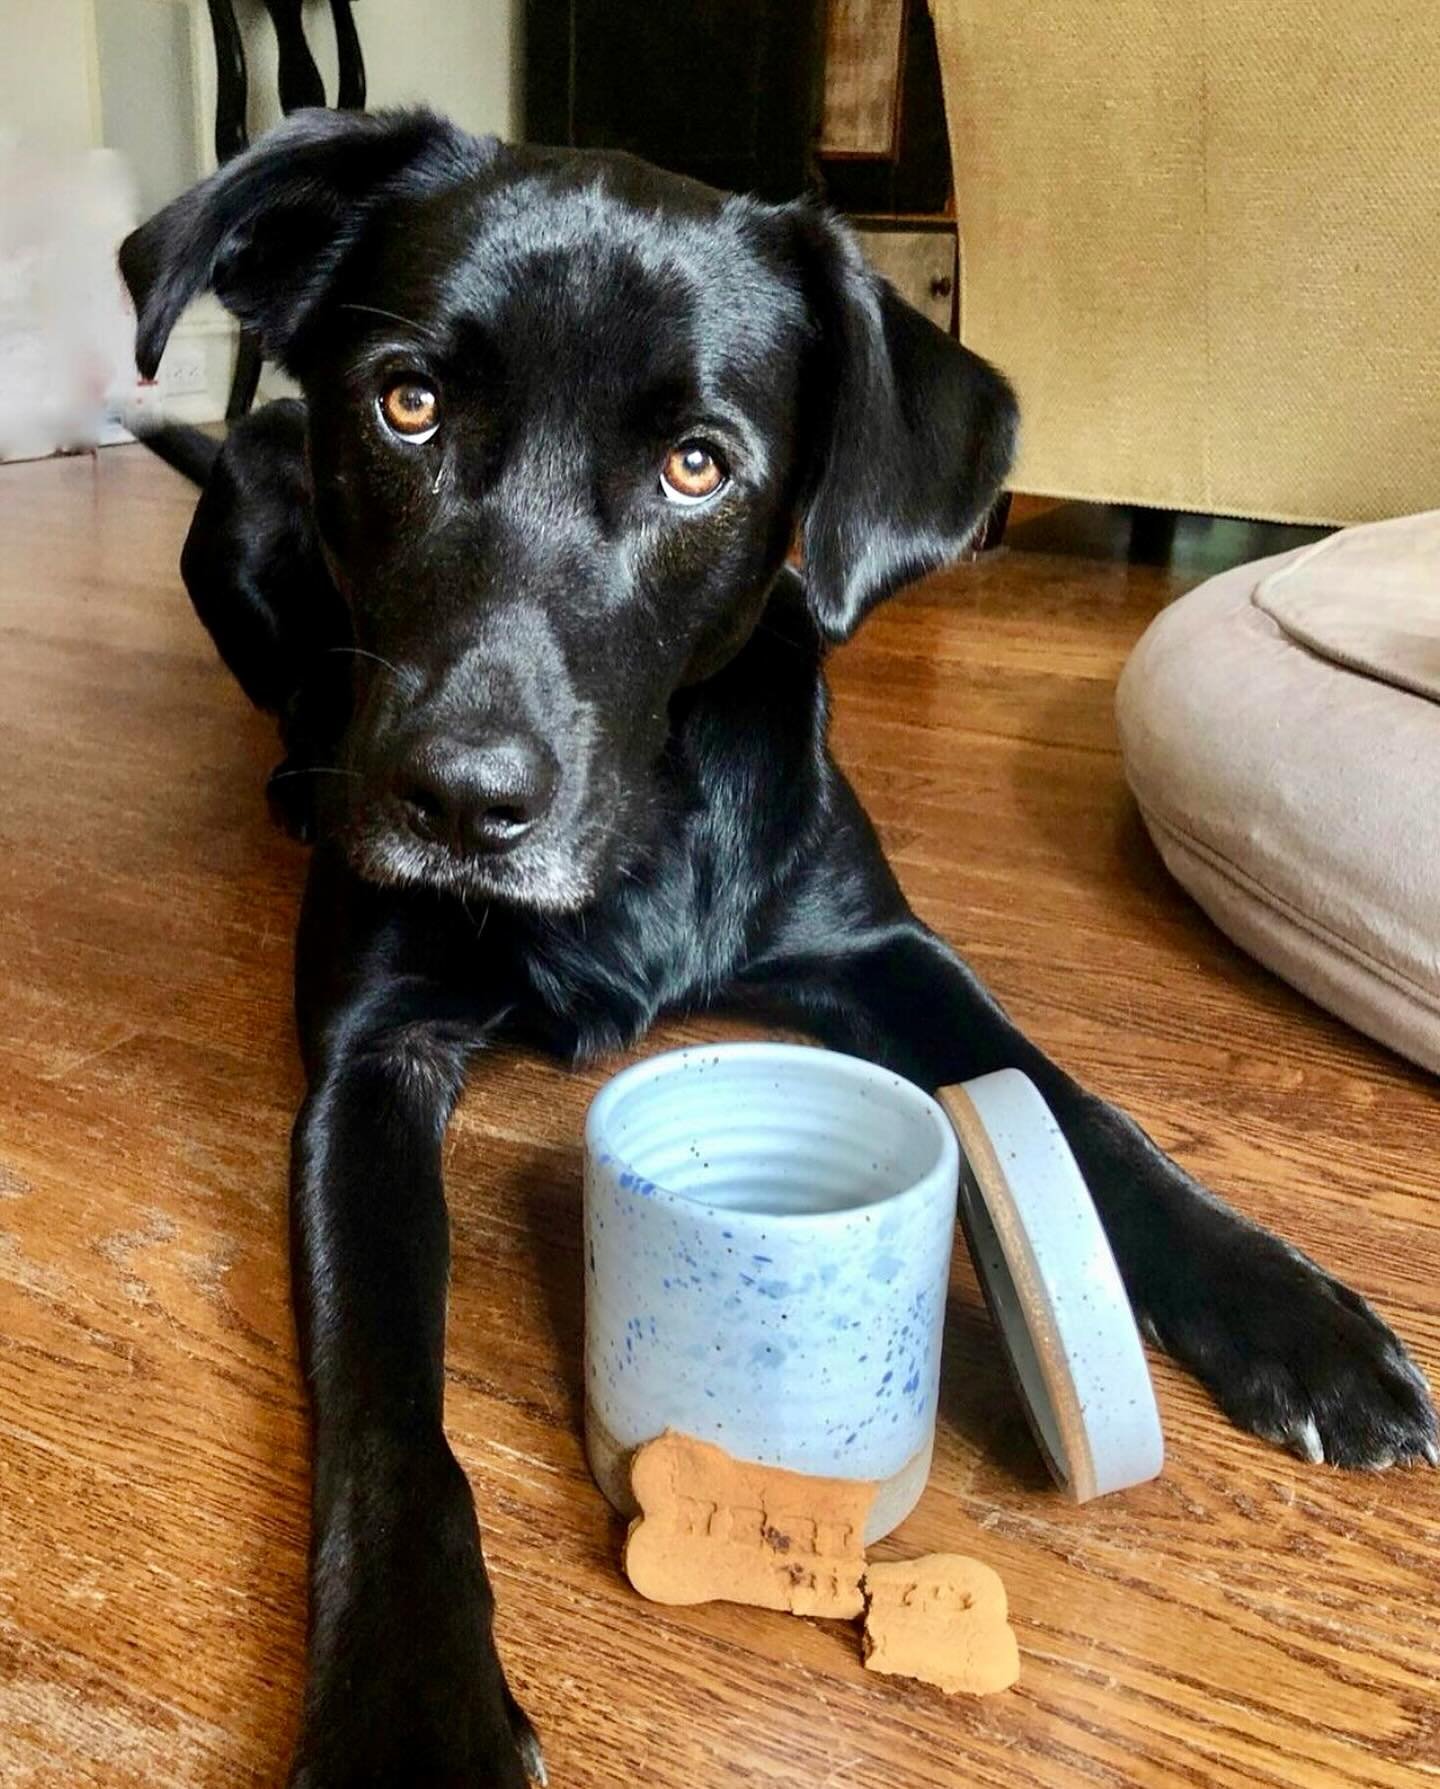 It&rsquo;s an extra biscuit kind of morning for Mason! 

#handmadehome #curateyourspace #artfullhome #blueandwhitepottery #blueaesthetic #classicstyle #everydayluxury #beautifulmatters #handmadeceramics #objectsofdesire #dogbiscuit #yesplease